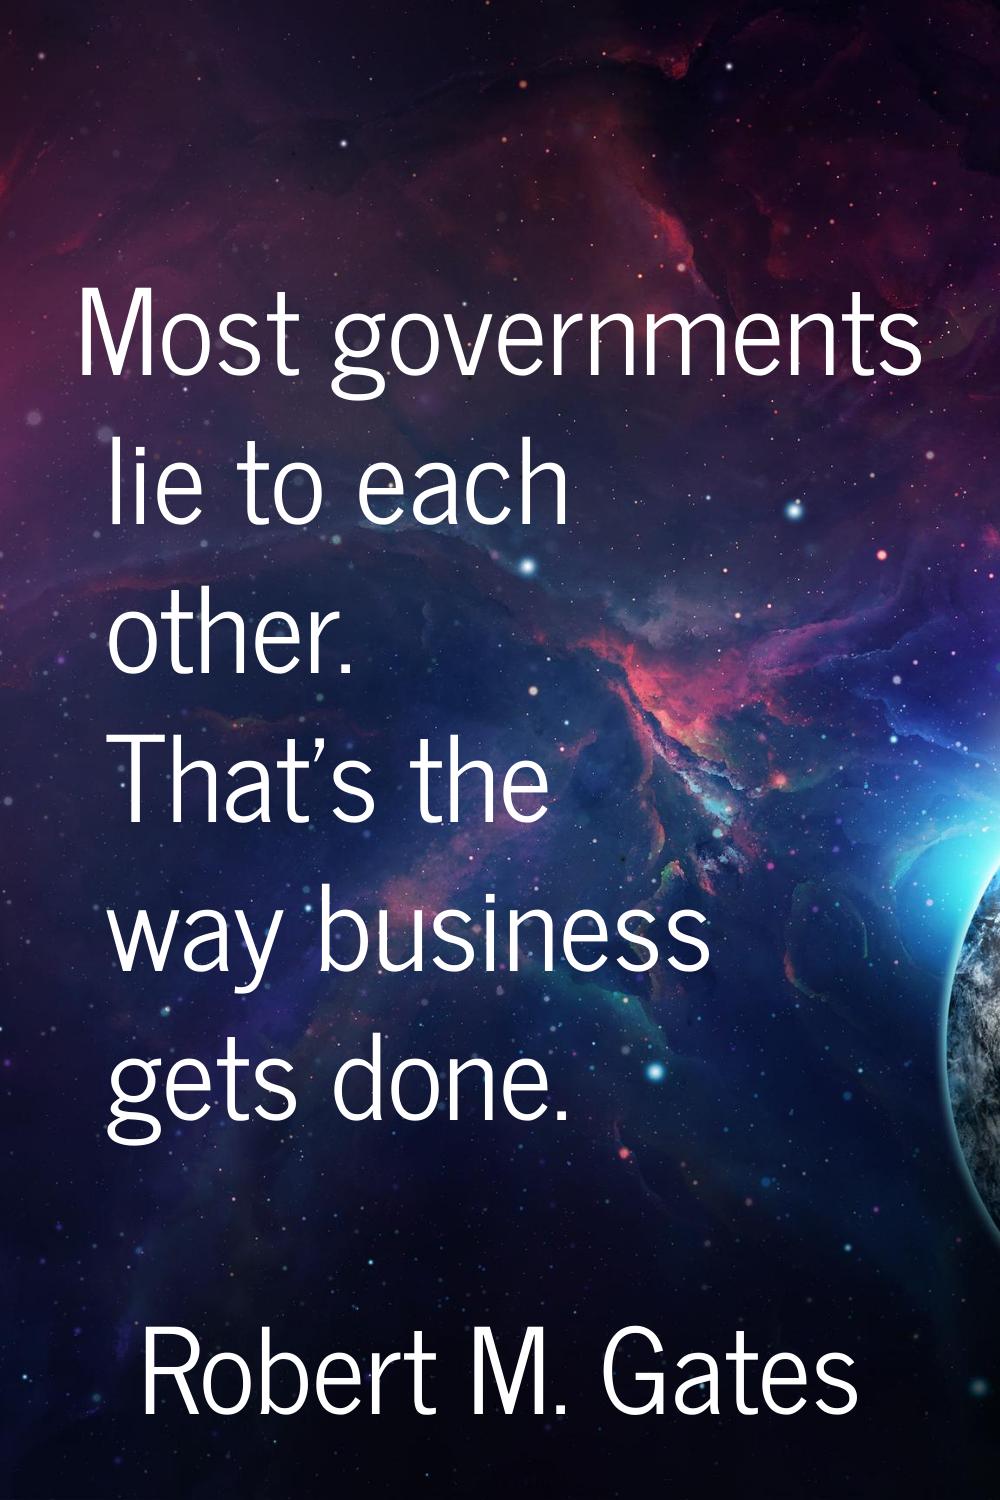 Most governments lie to each other. That's the way business gets done.